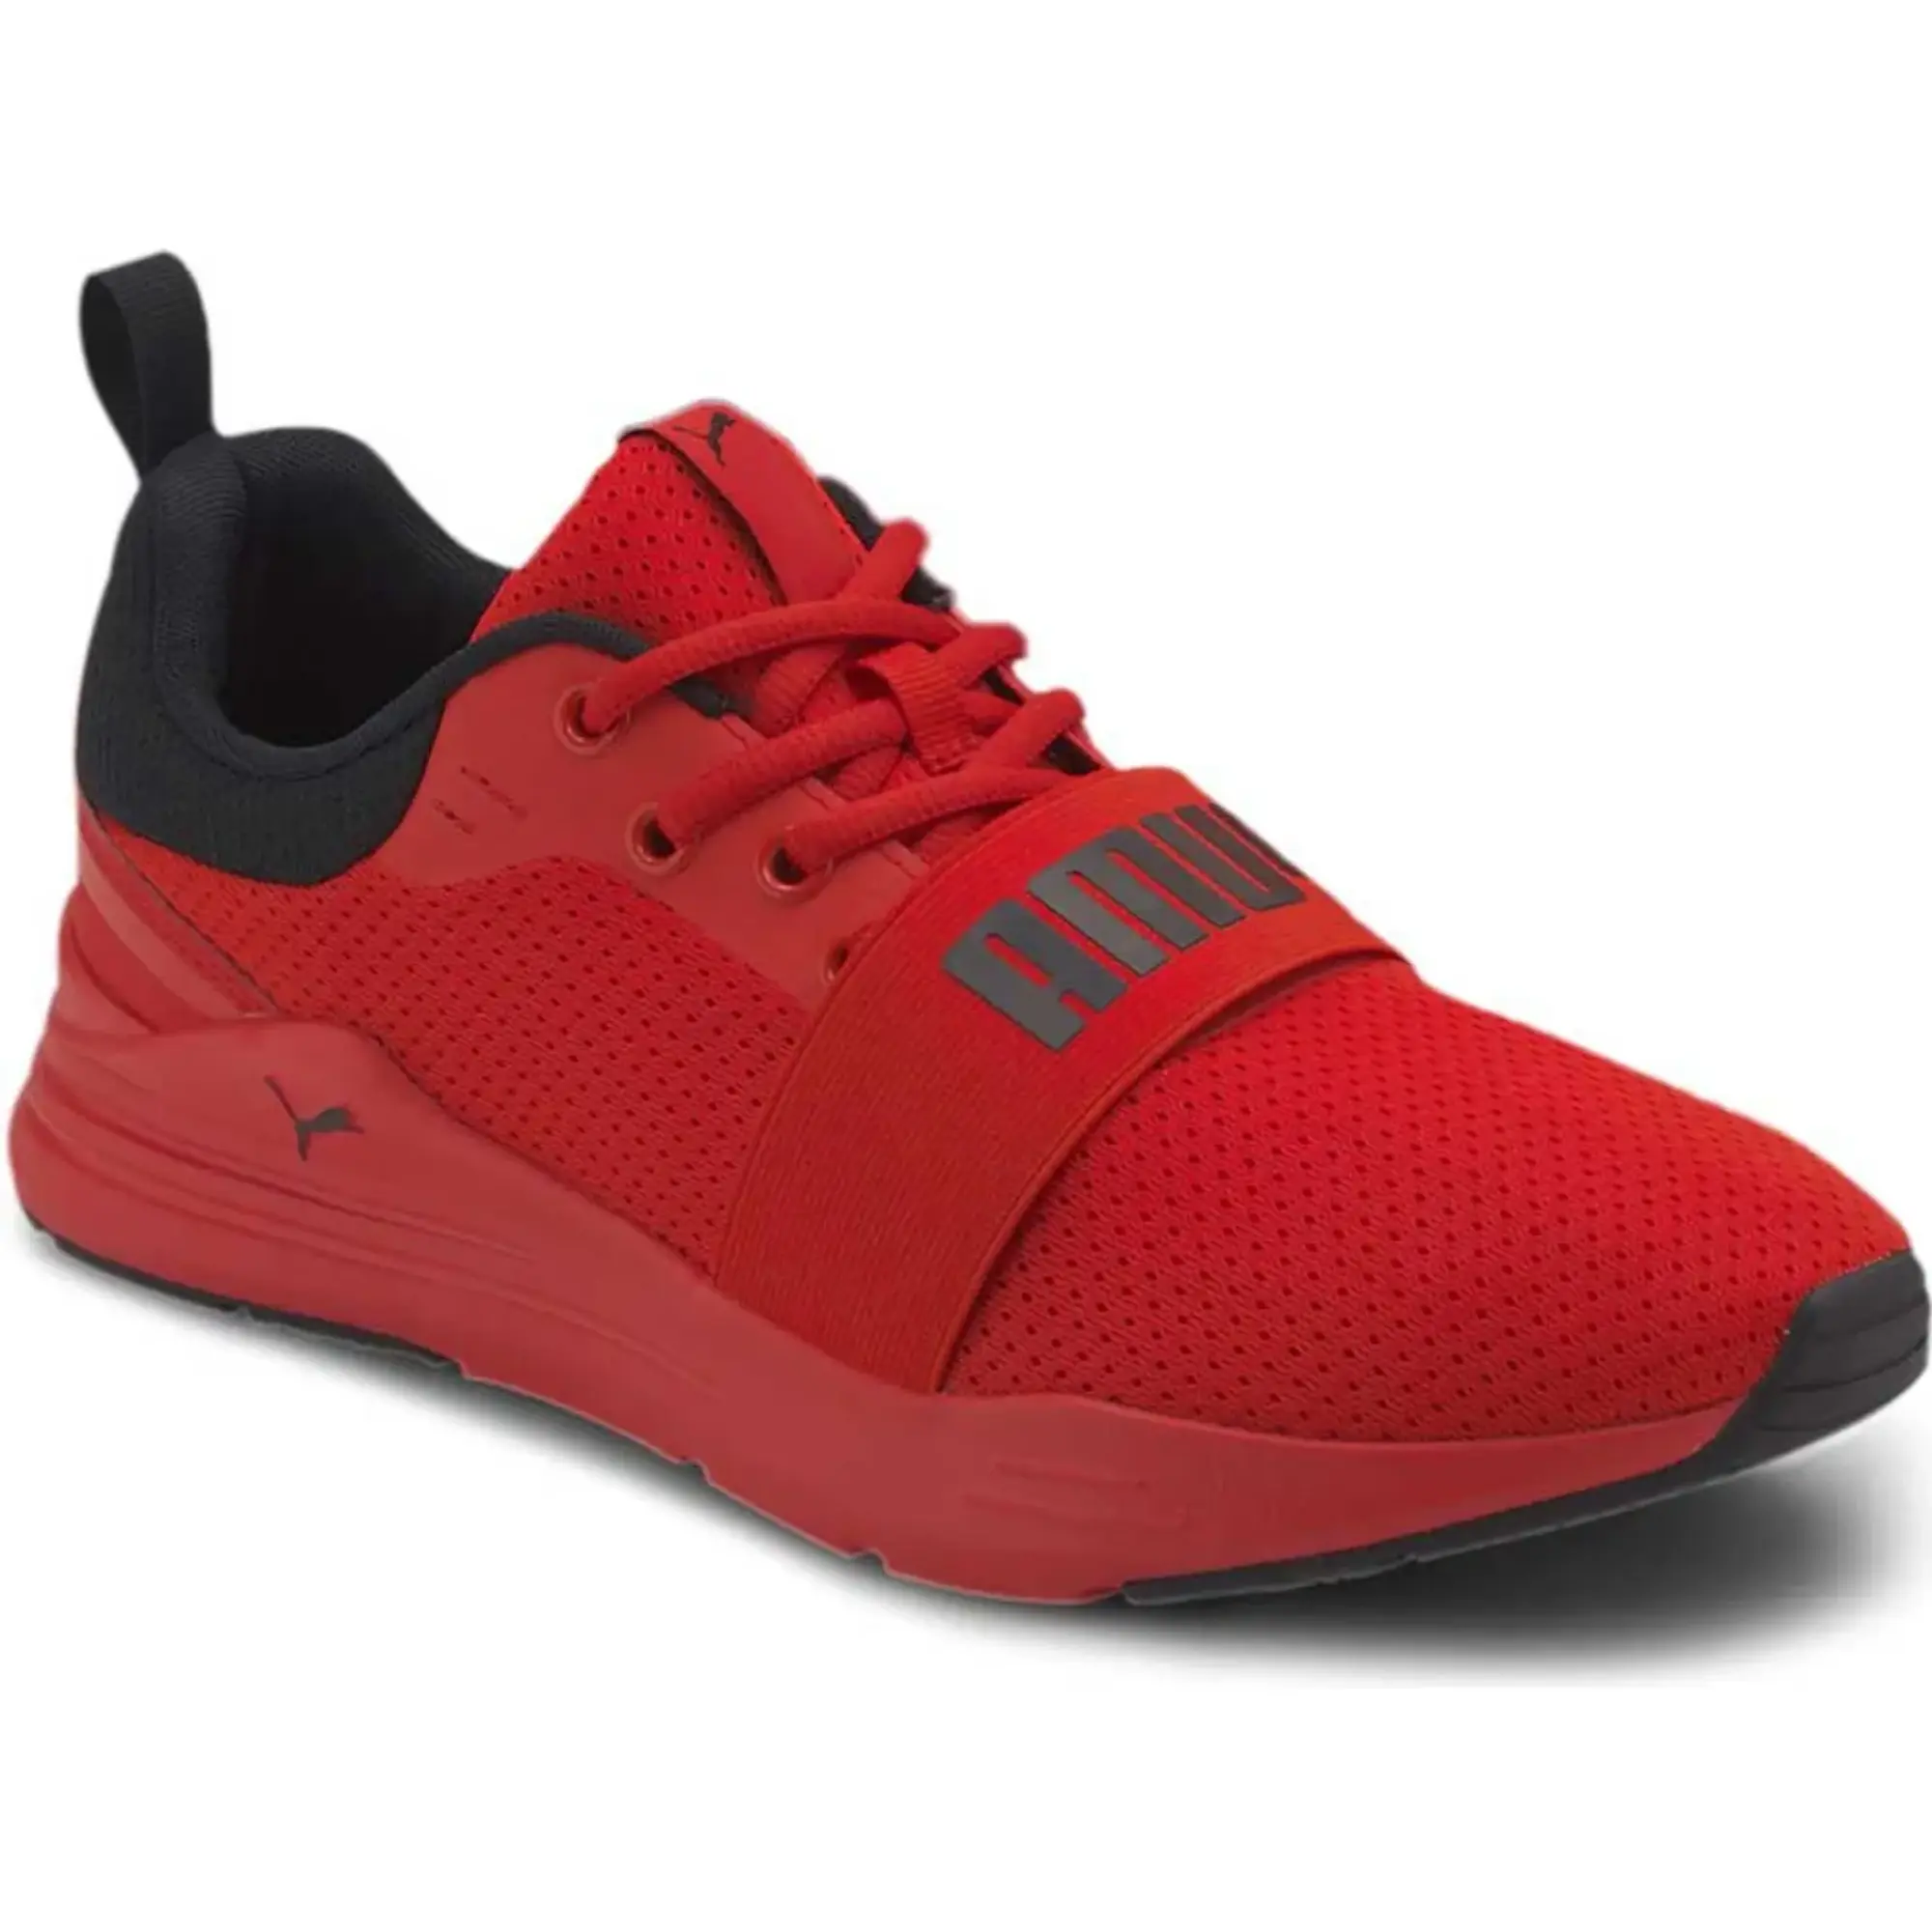 PUMA Women's Wired Trainers, High Risk Red/Black